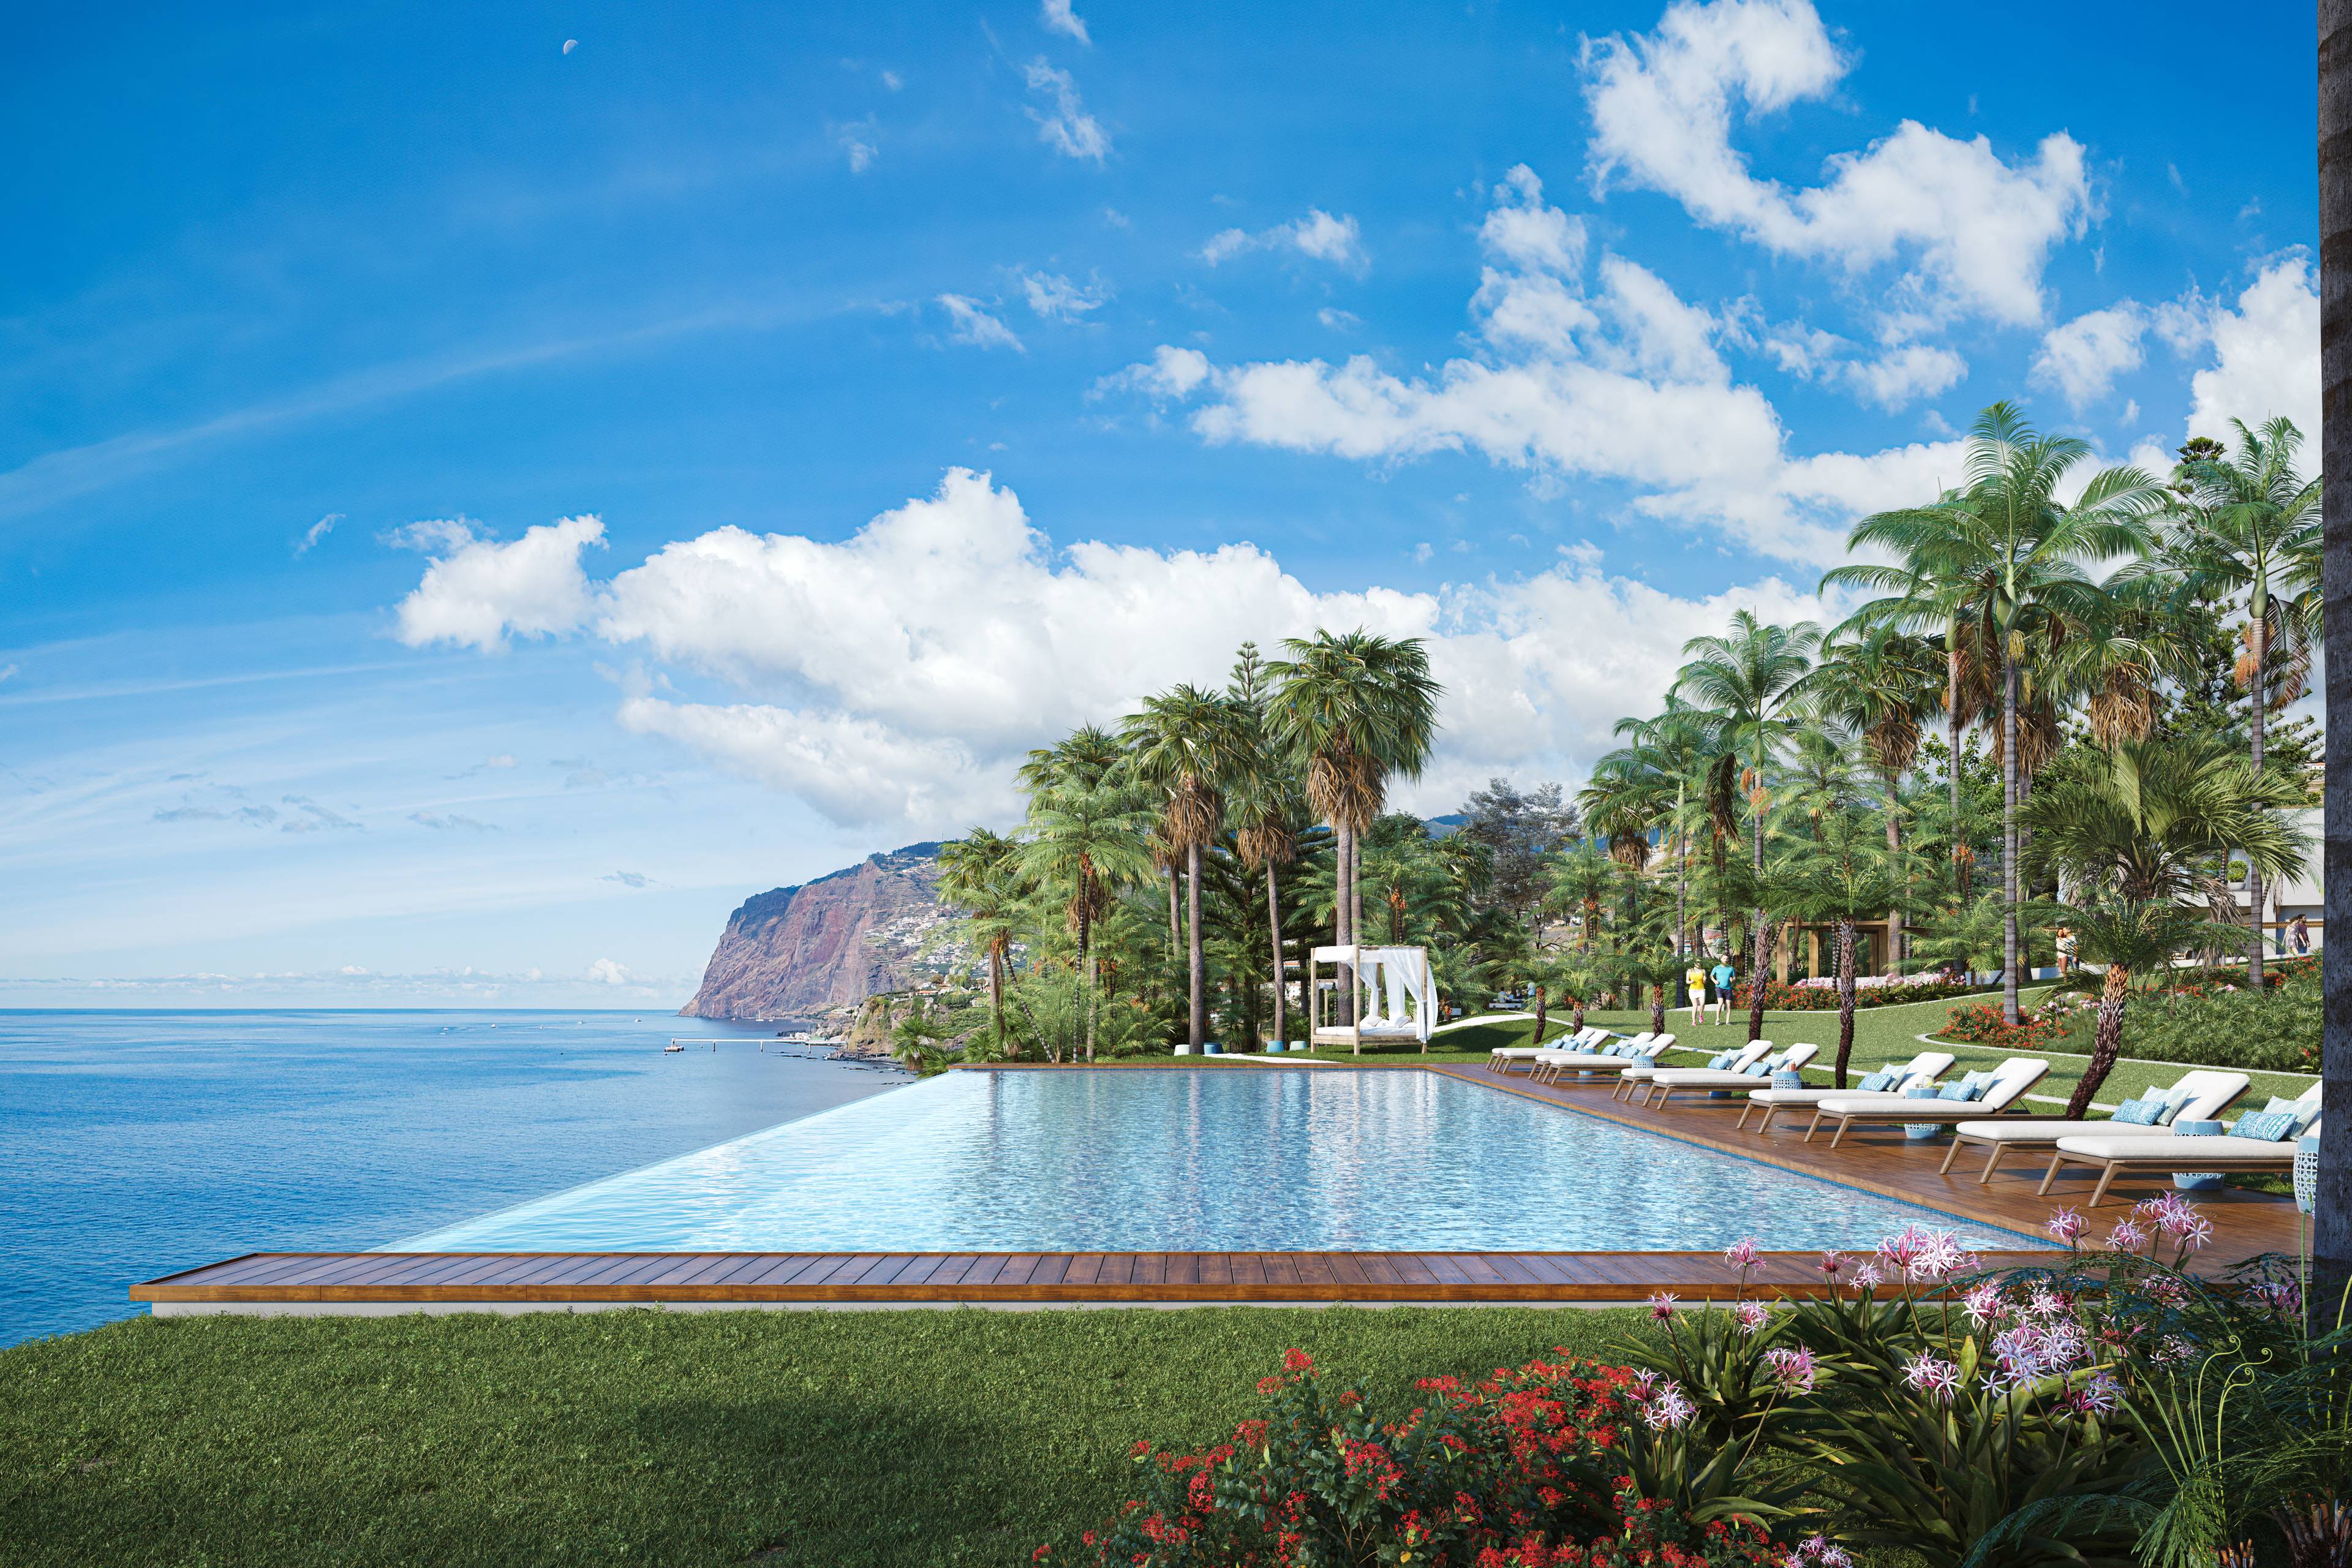 3 Bedroom Apartment - Sophisticated, elegant and modern in a exclusive condominium in Madeira